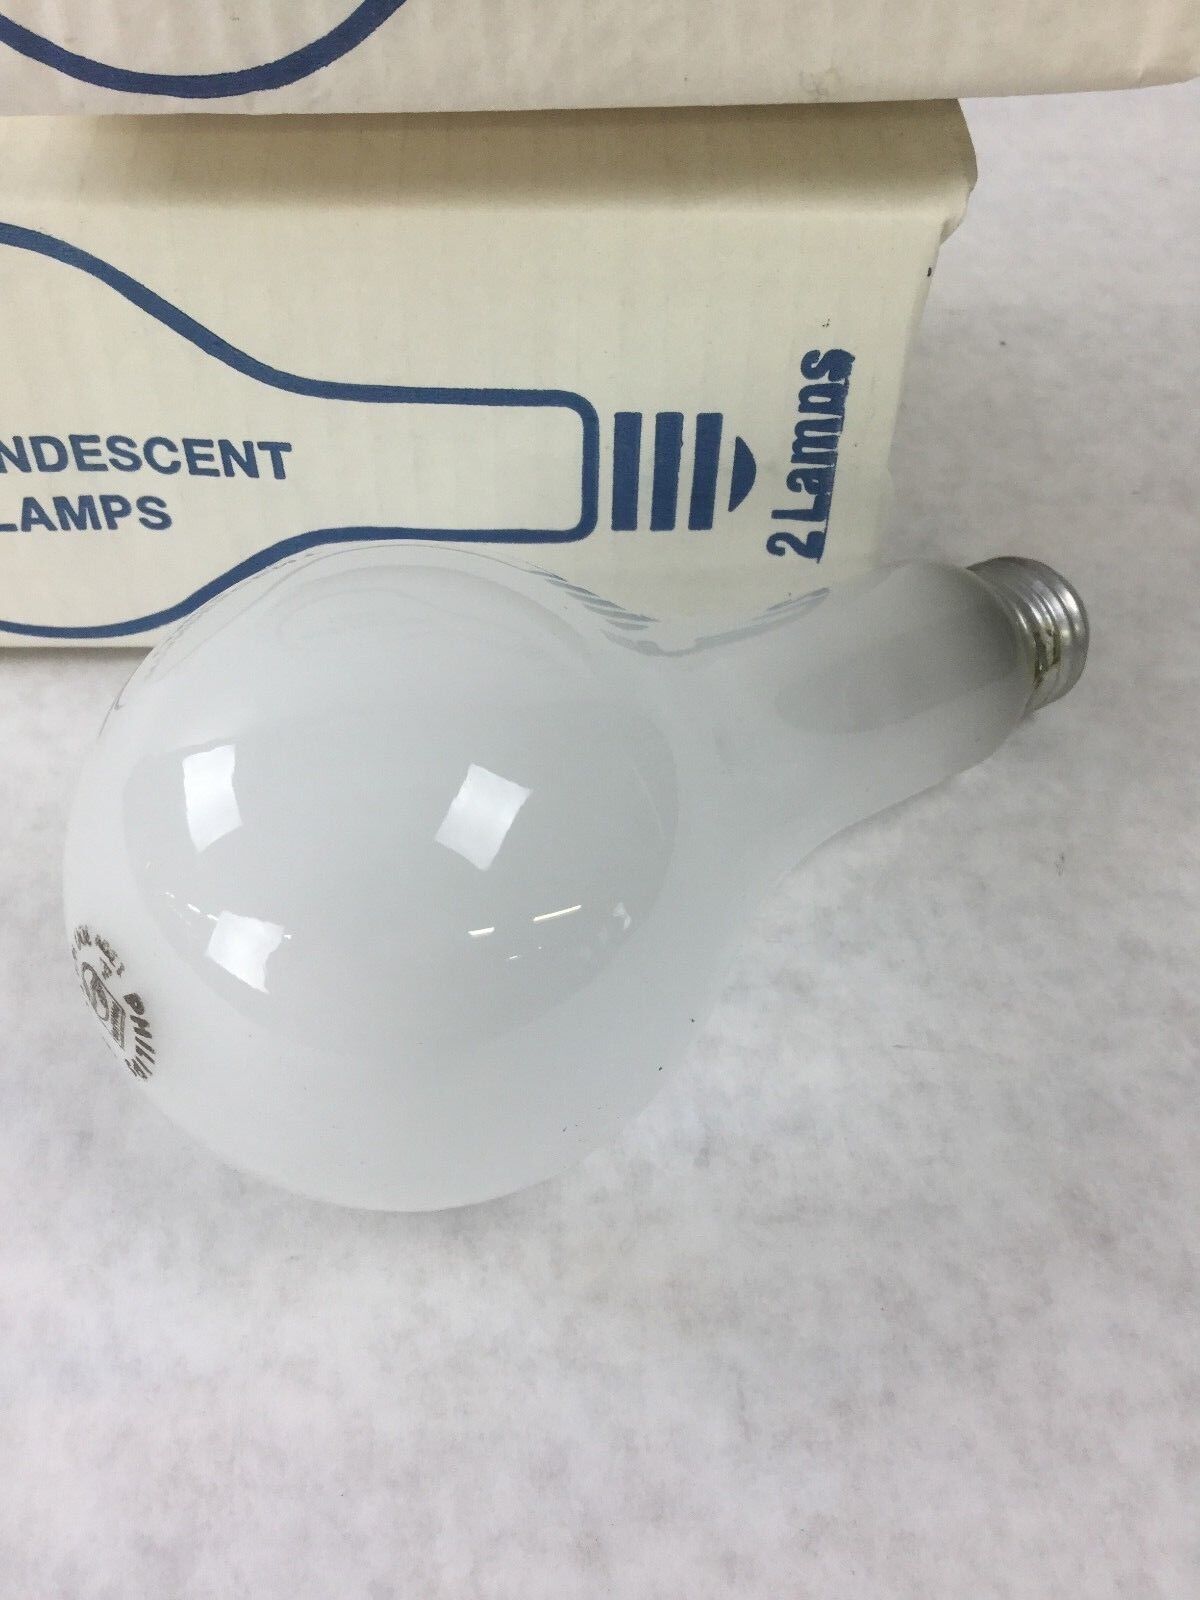 Philips 300M/99IF Frost Incandescent Light Bulb 300W, 130 volt, Lot of (4) NEW